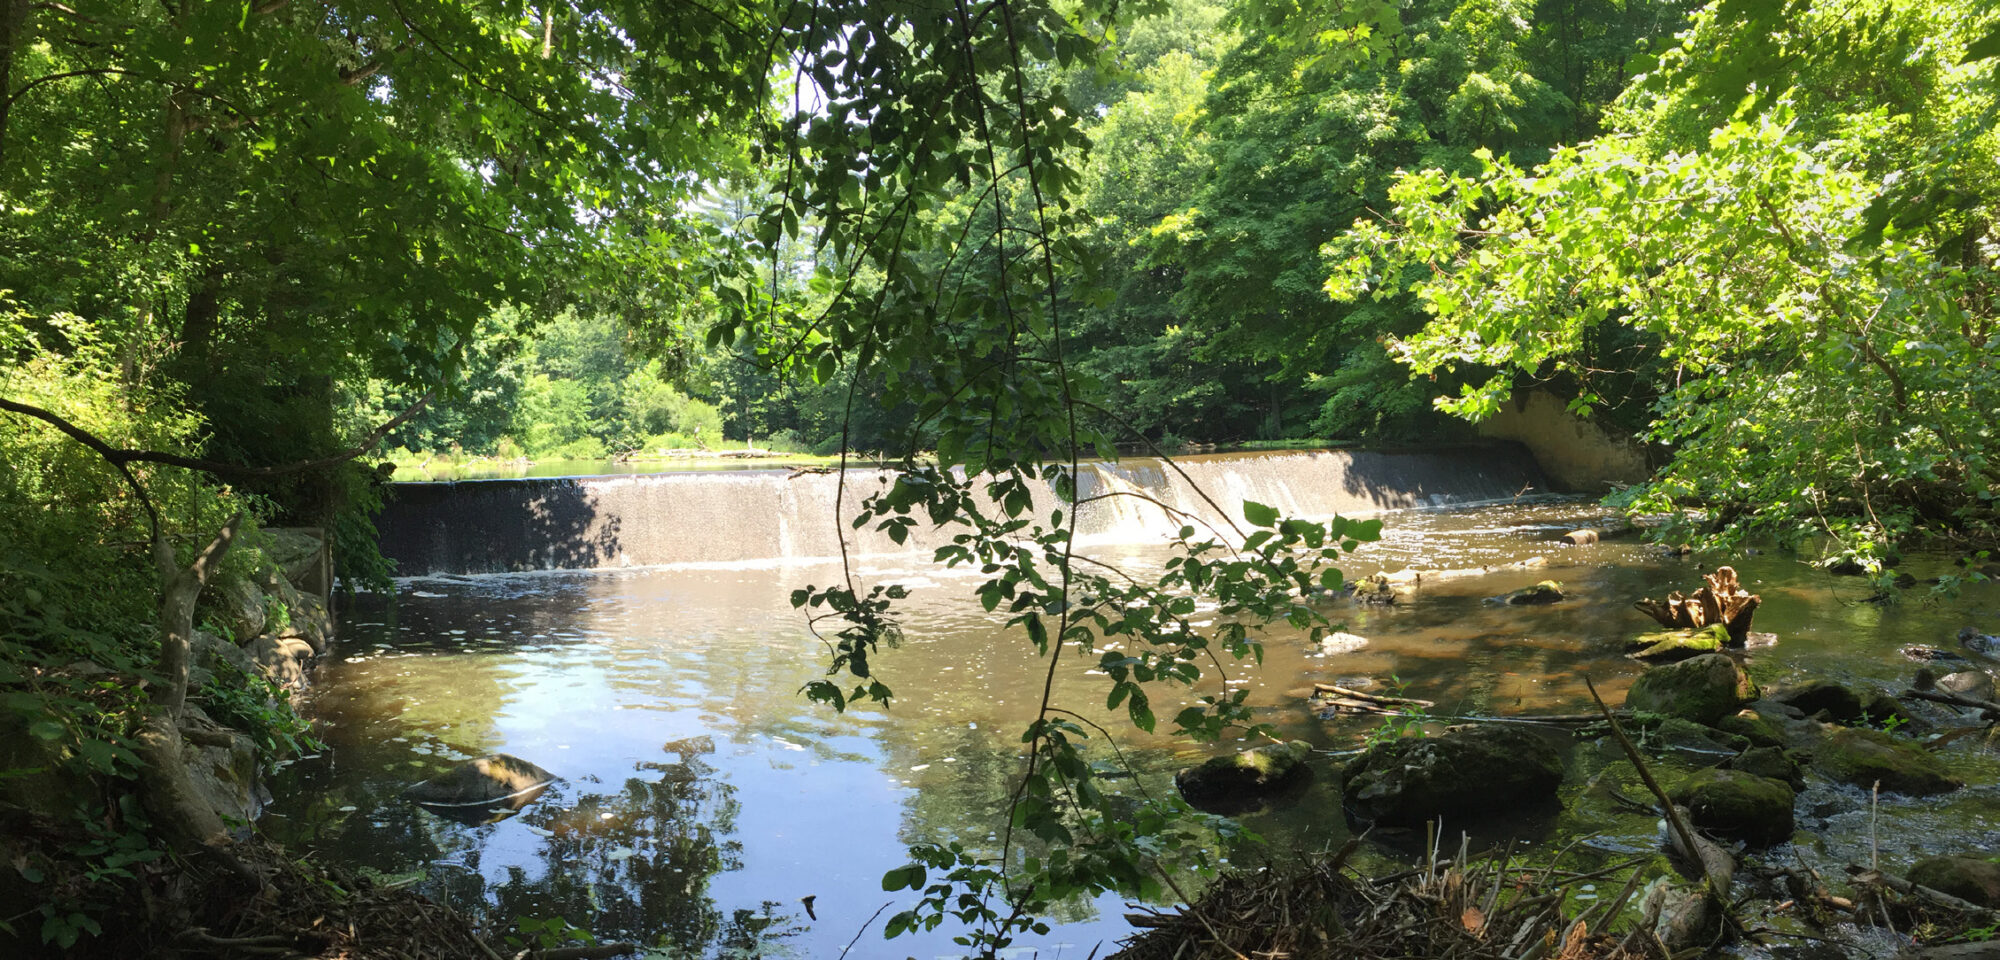 BIL funding will help support removal of the Strong Pond Dam in Wilton, CT. The dam is a barrier to fish migration between the Sound and upstream habitat. A photo from Save the Sound